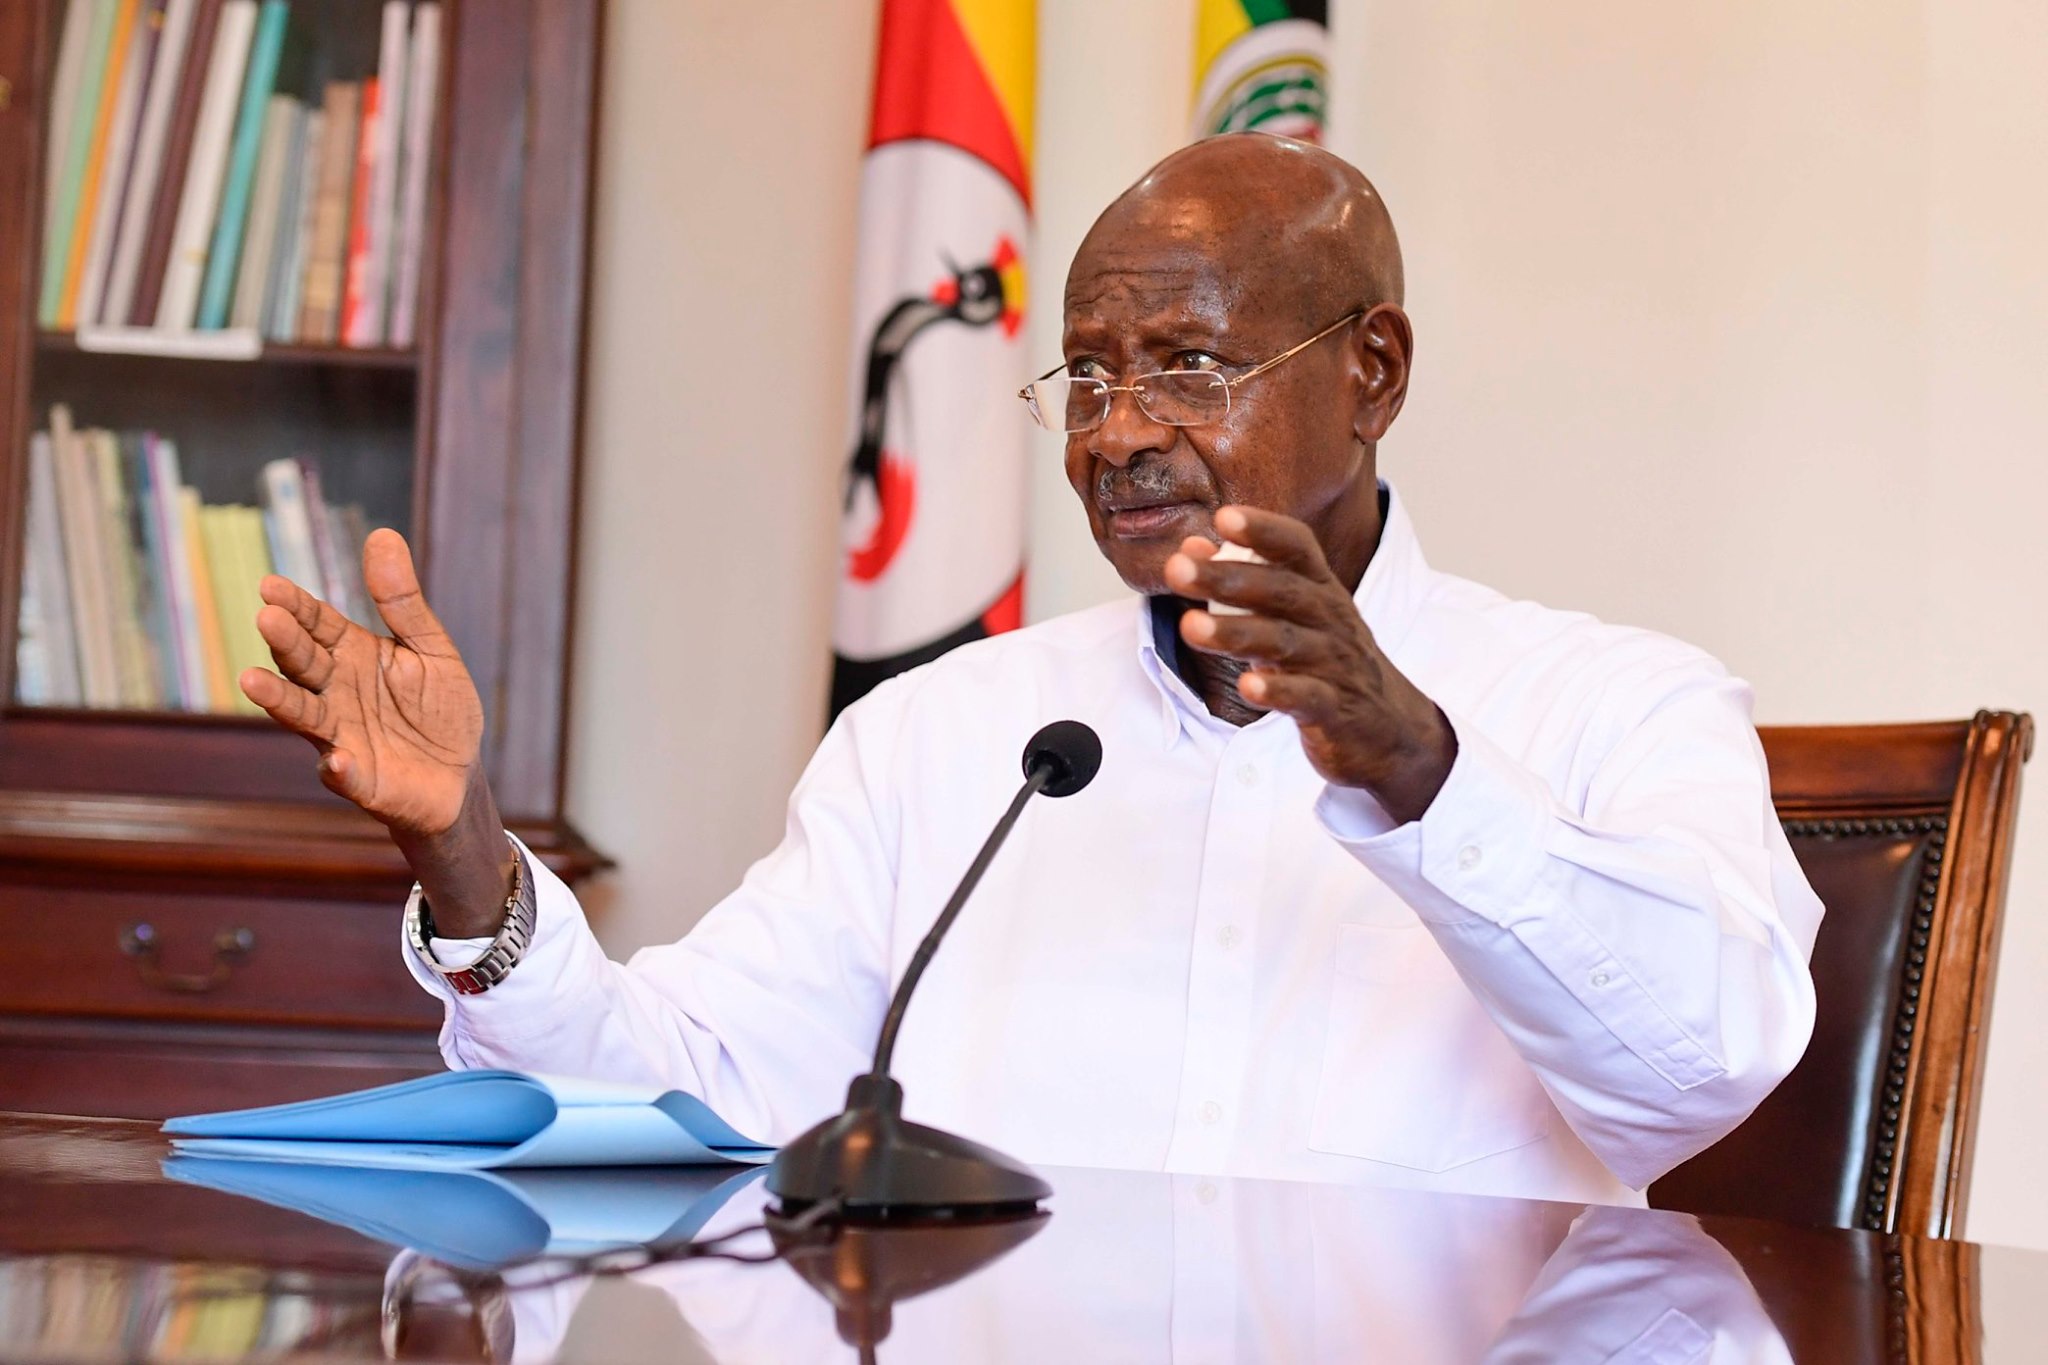 Museveni Asks Covid-19 Task Force to Review Re-opening of Schools, Bars